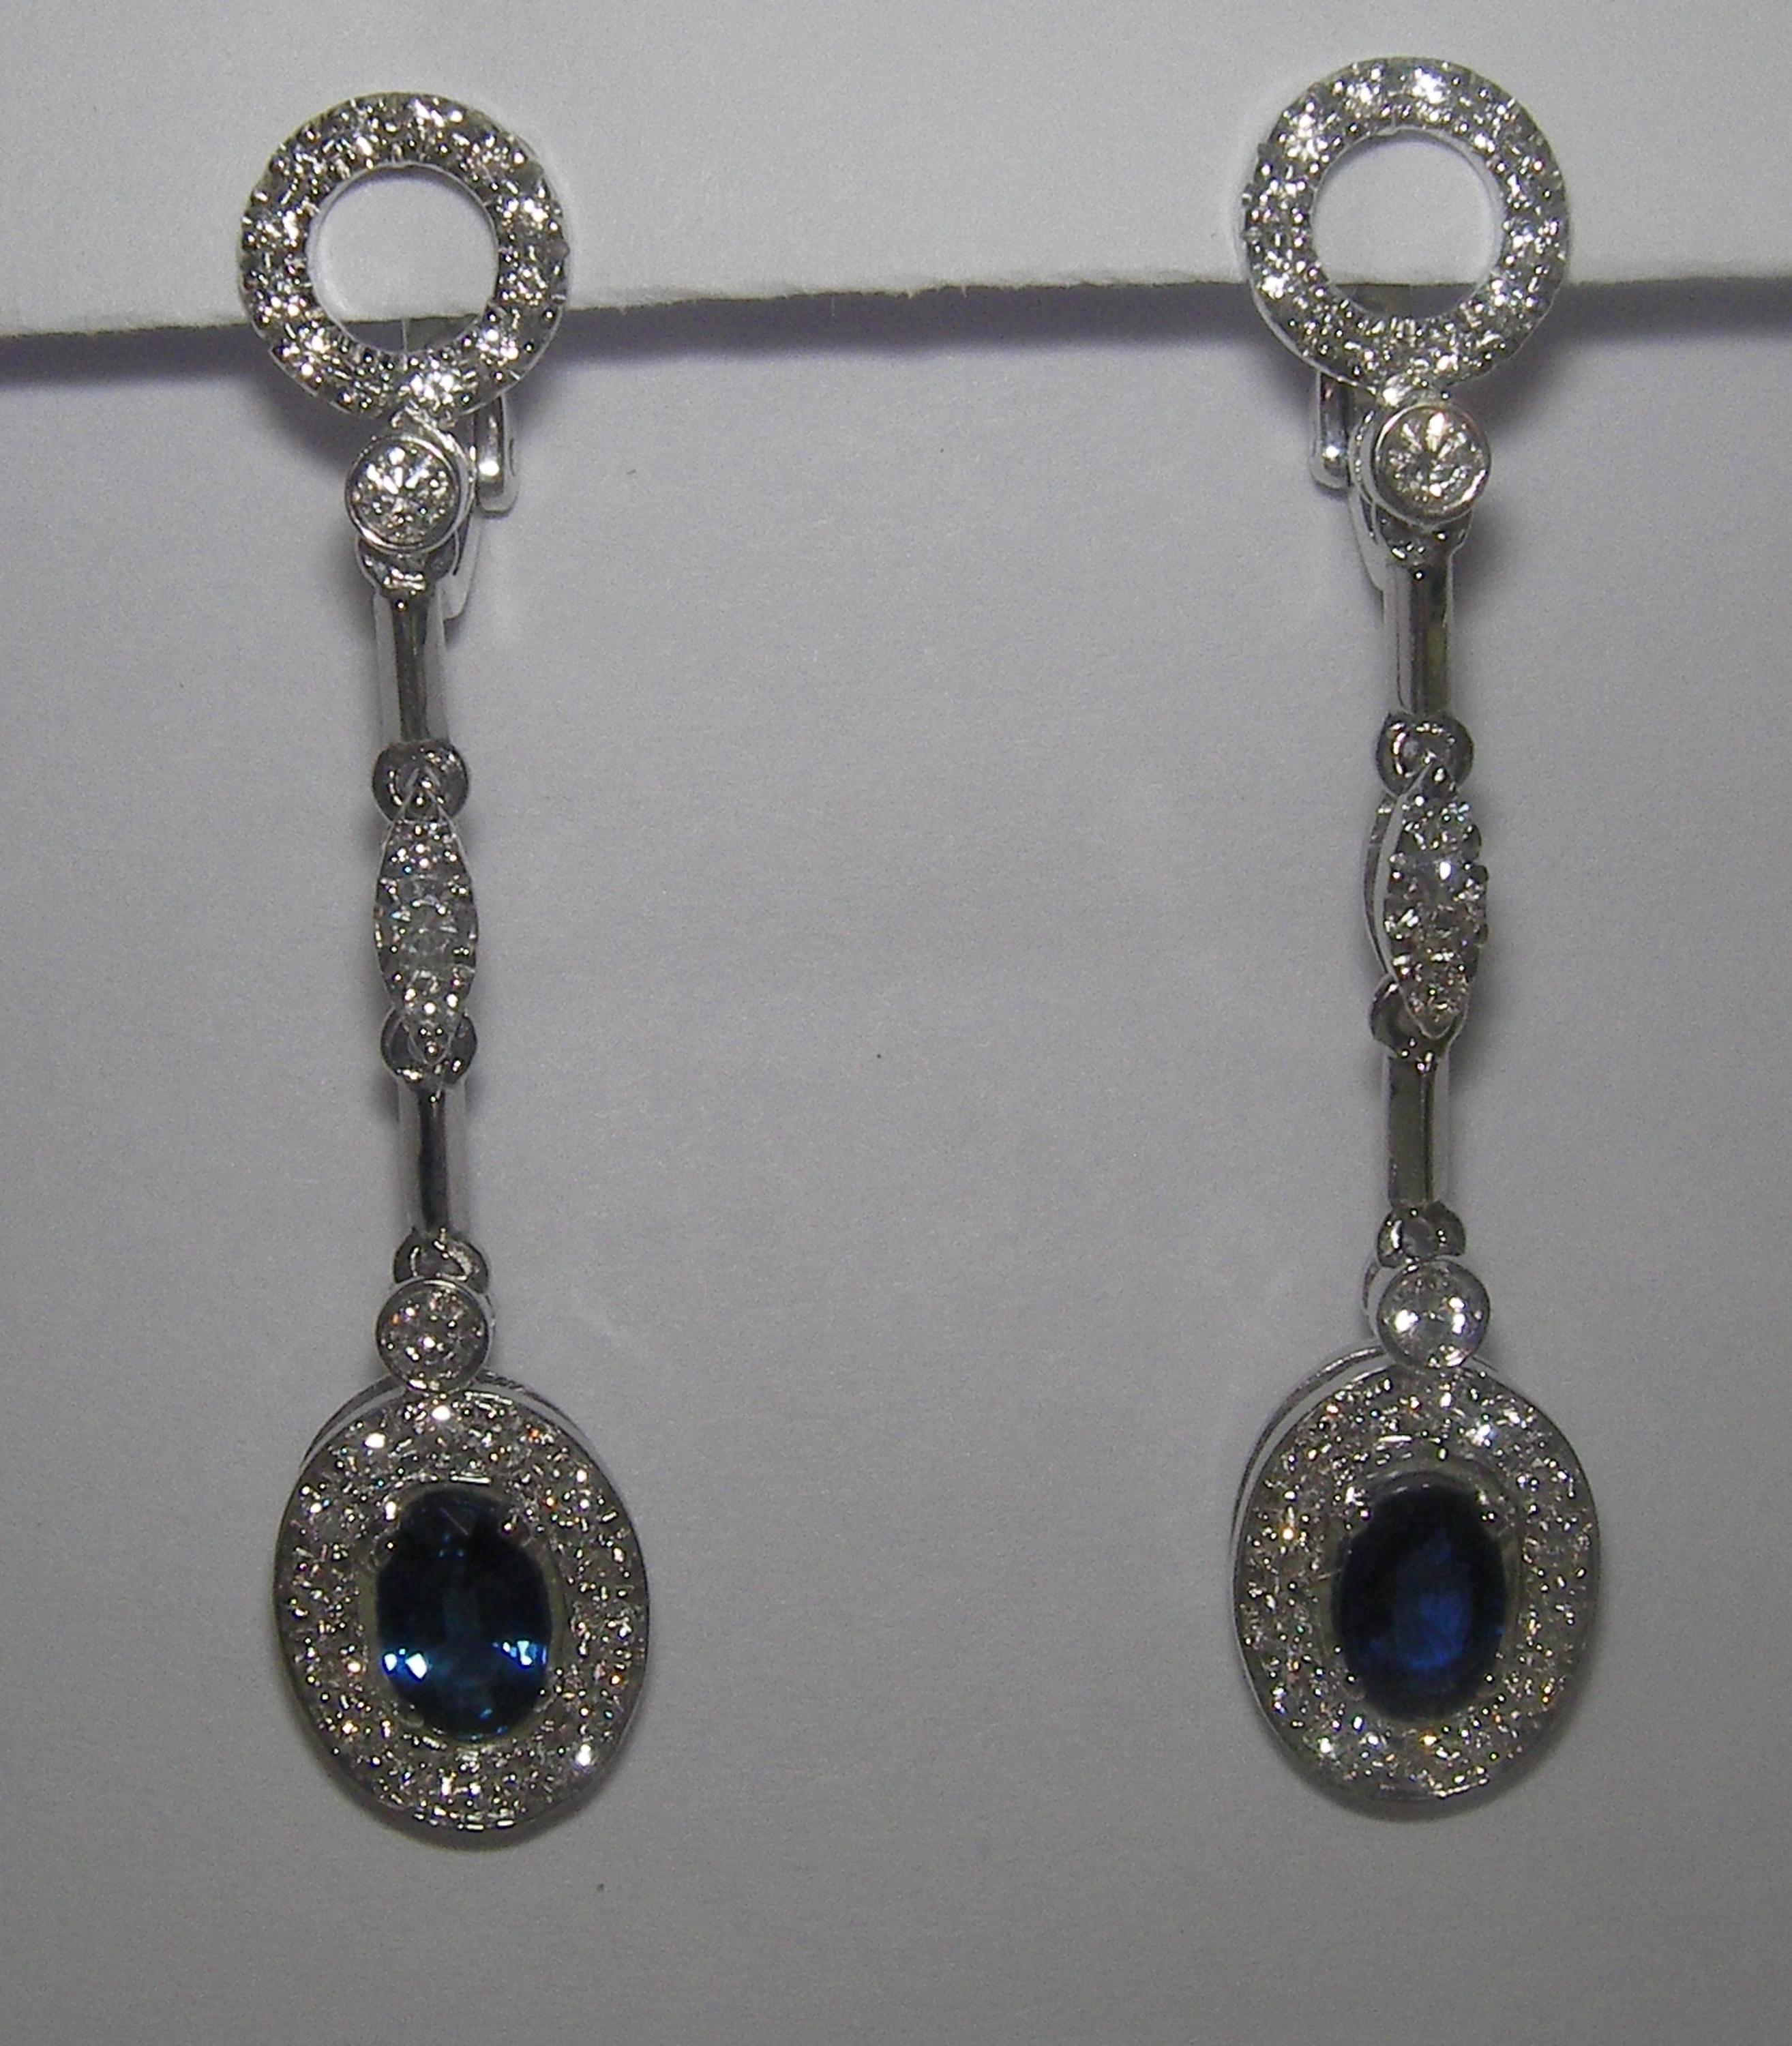 18 Karat White Gold Diamond and Sapphire Dangle Earrings

62  Diamonds 0.89Carat H SI
2 Sapphires  1.13 Carat


Founded in 1974, Gianni Lazzaro is a family-owned jewelry company based out of Düsseldorf, Germany.
Although rooted in Germany, Gianni